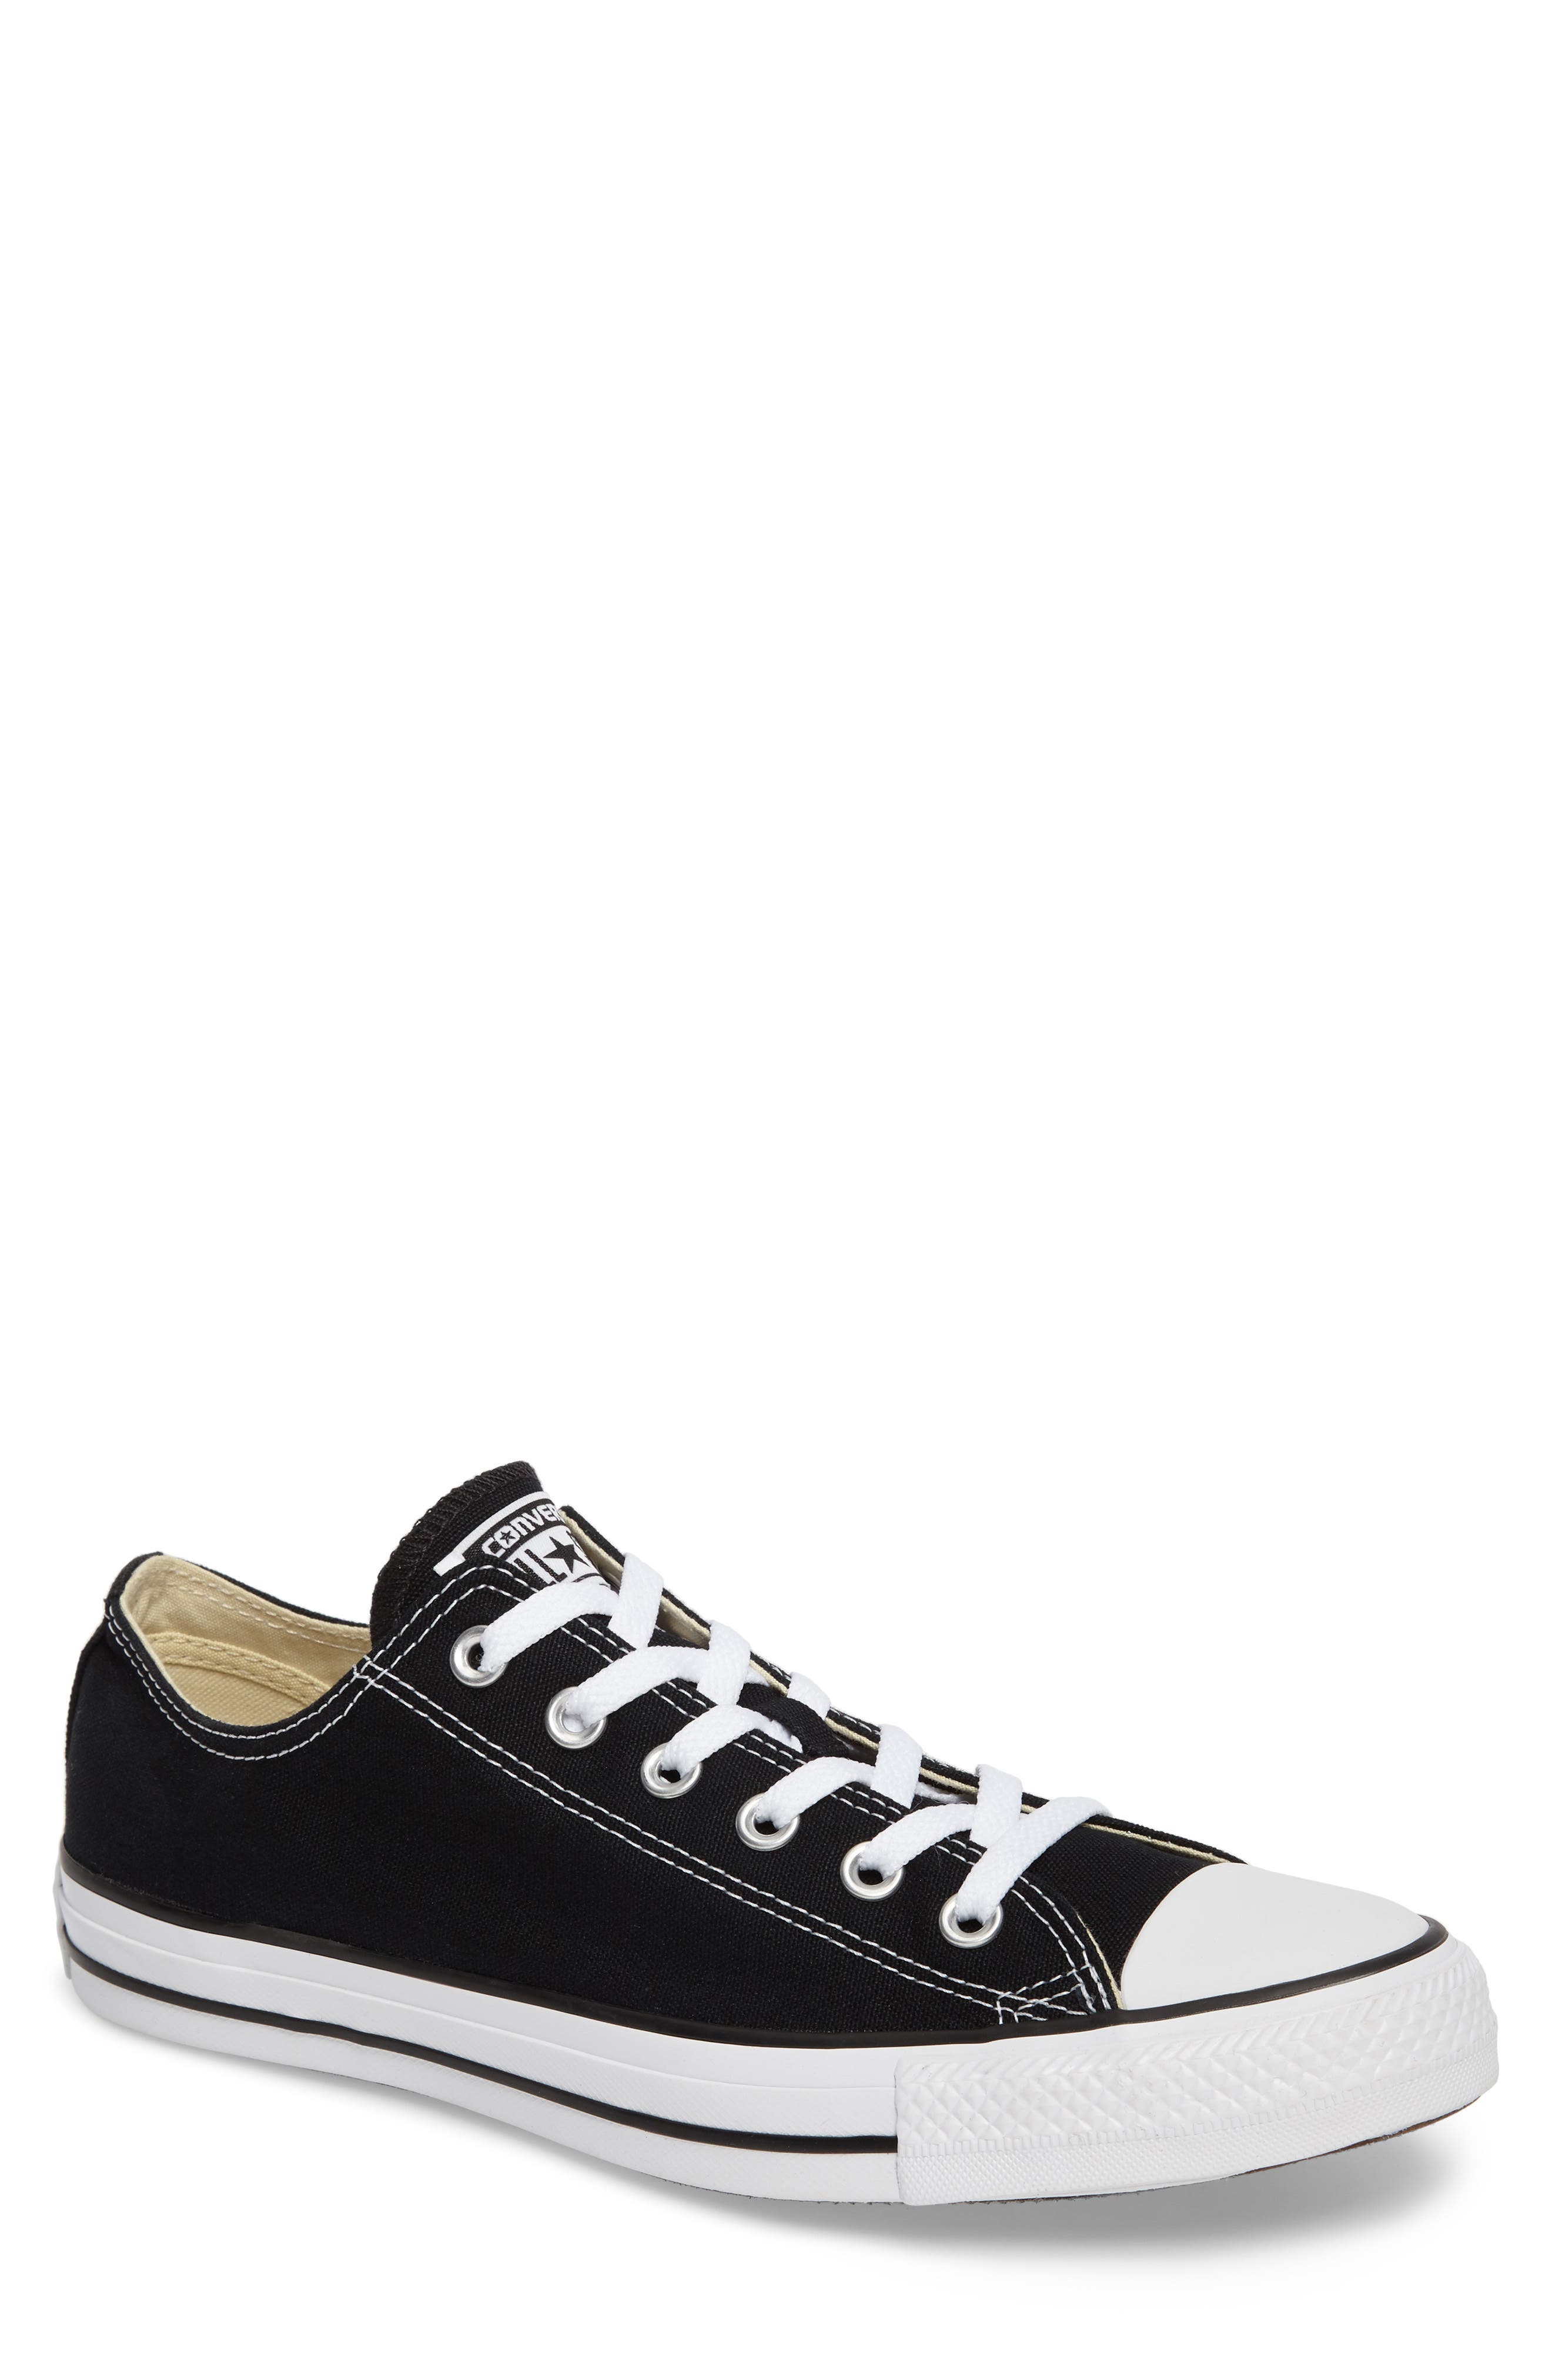 converse all star chuck taylor low